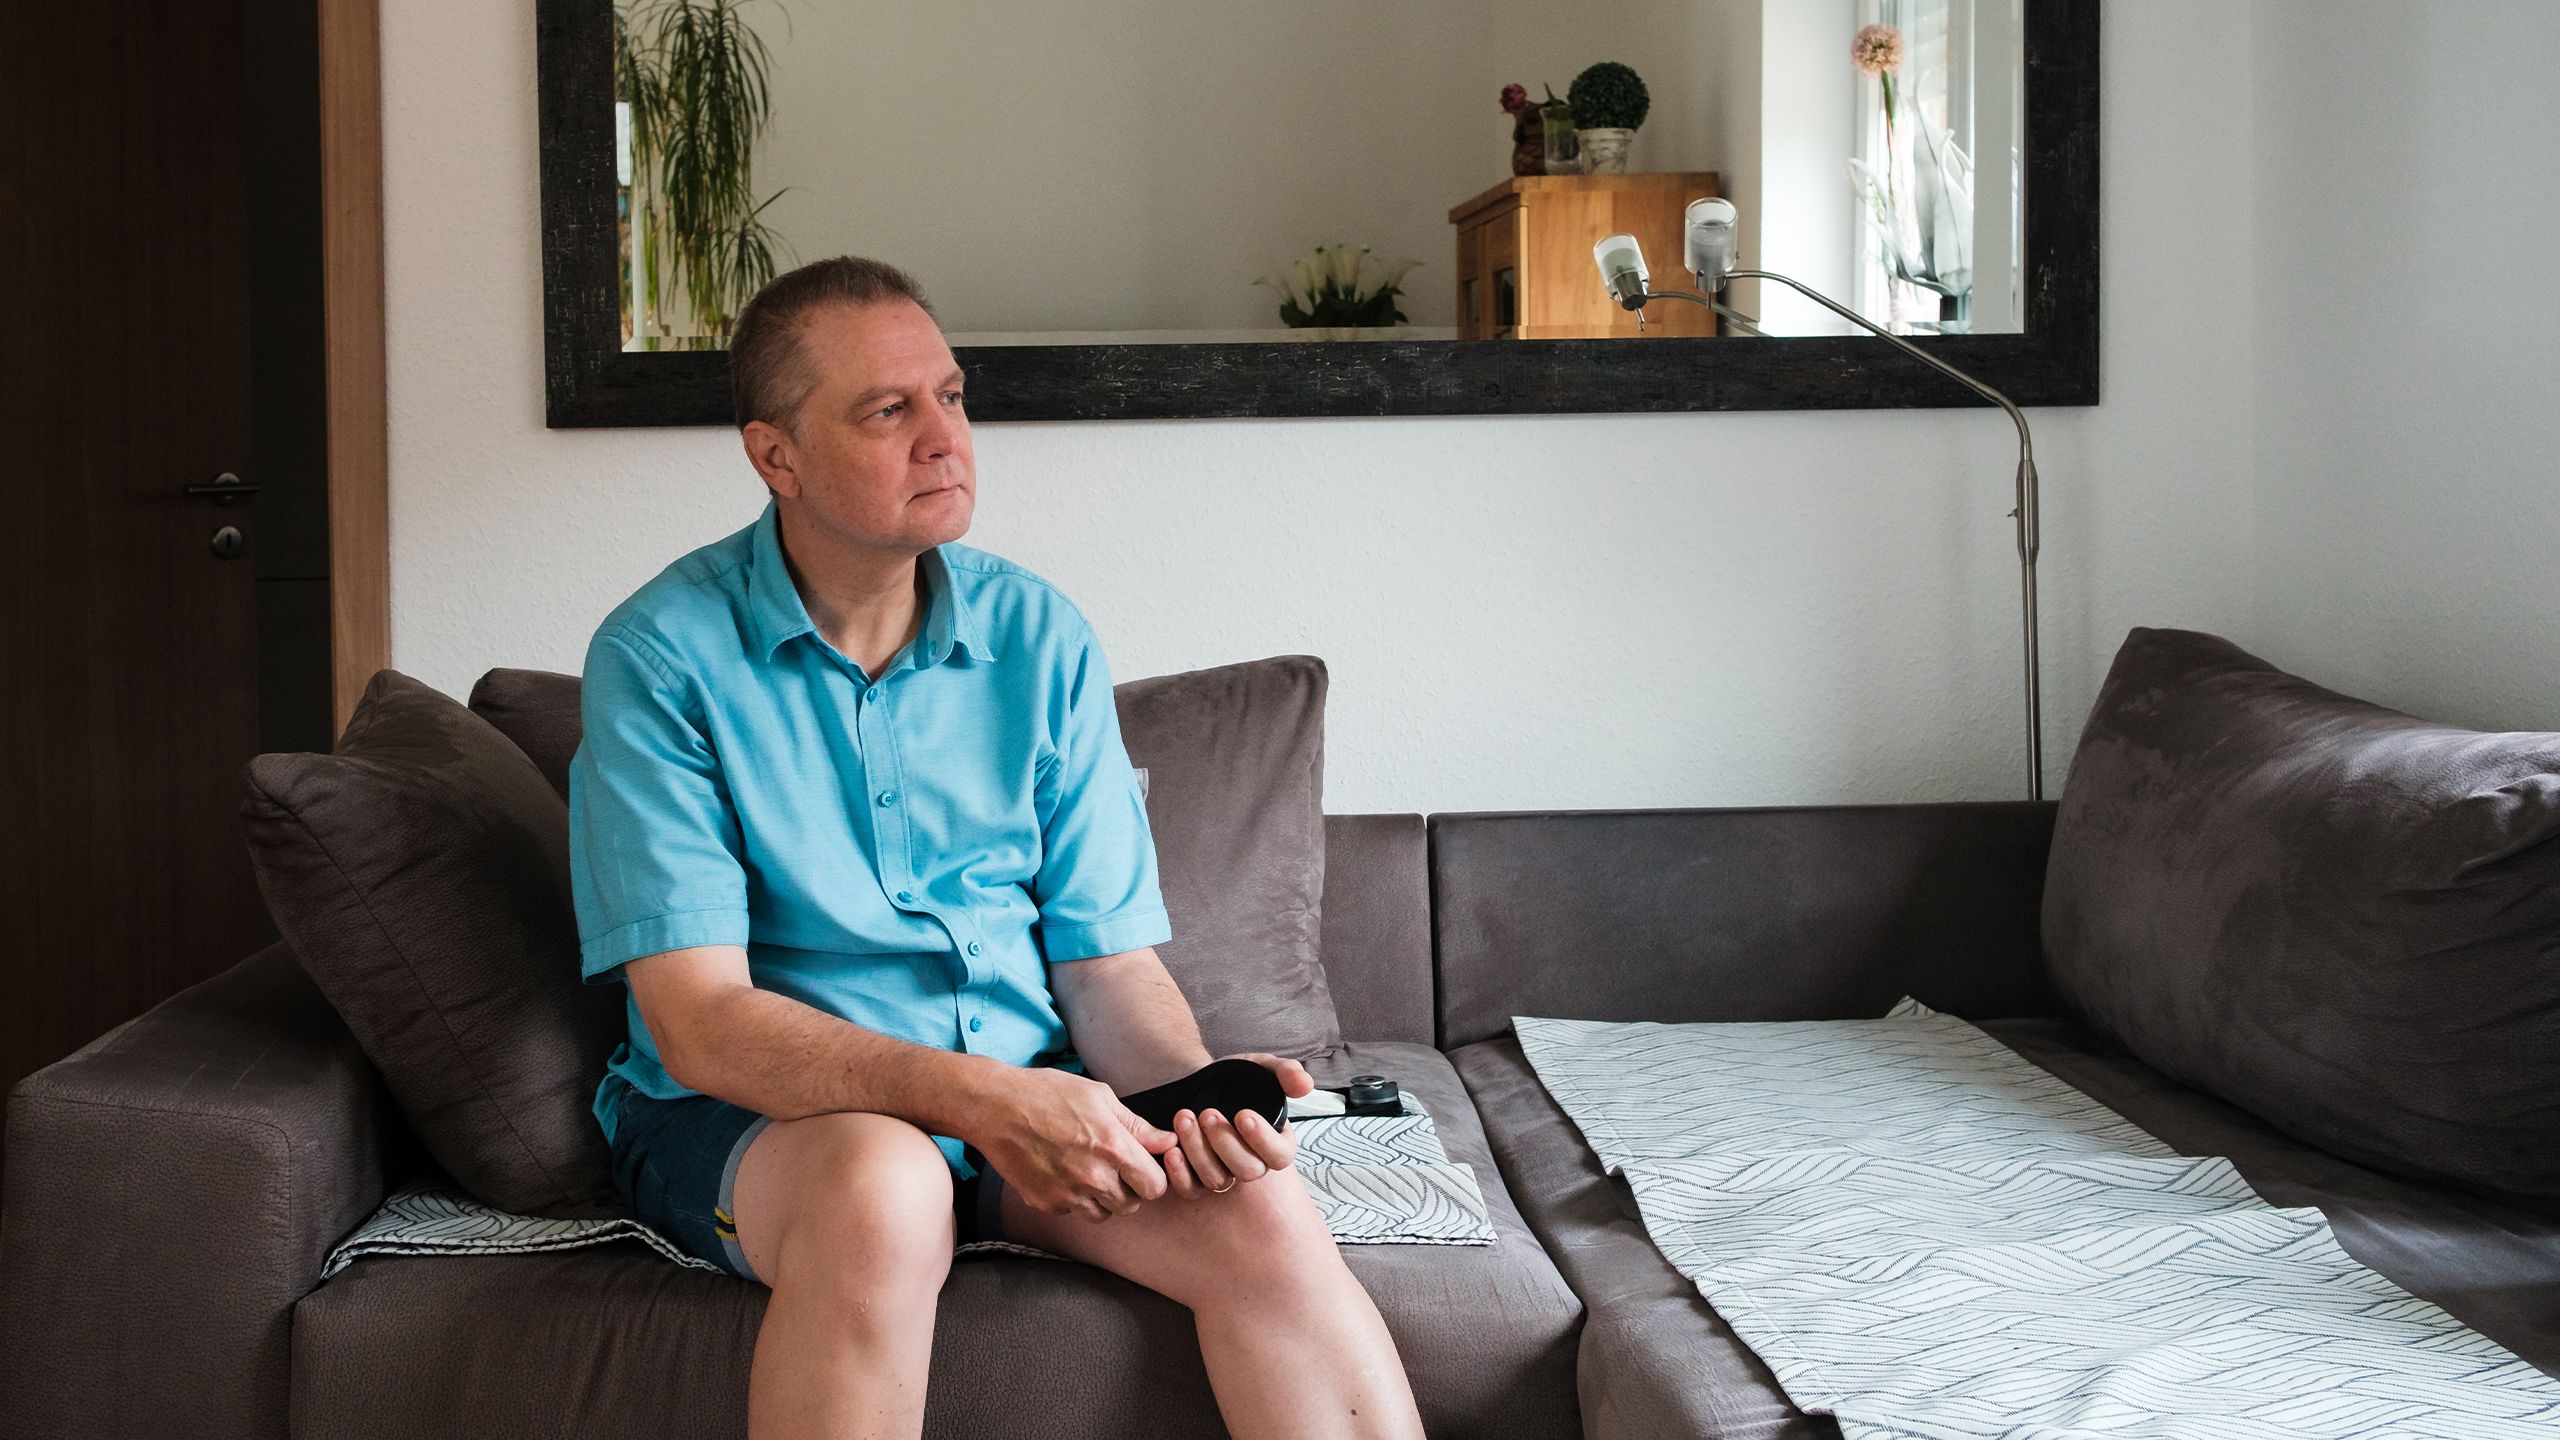 Markus Bohle holds his device while sitting on his sofa at home.